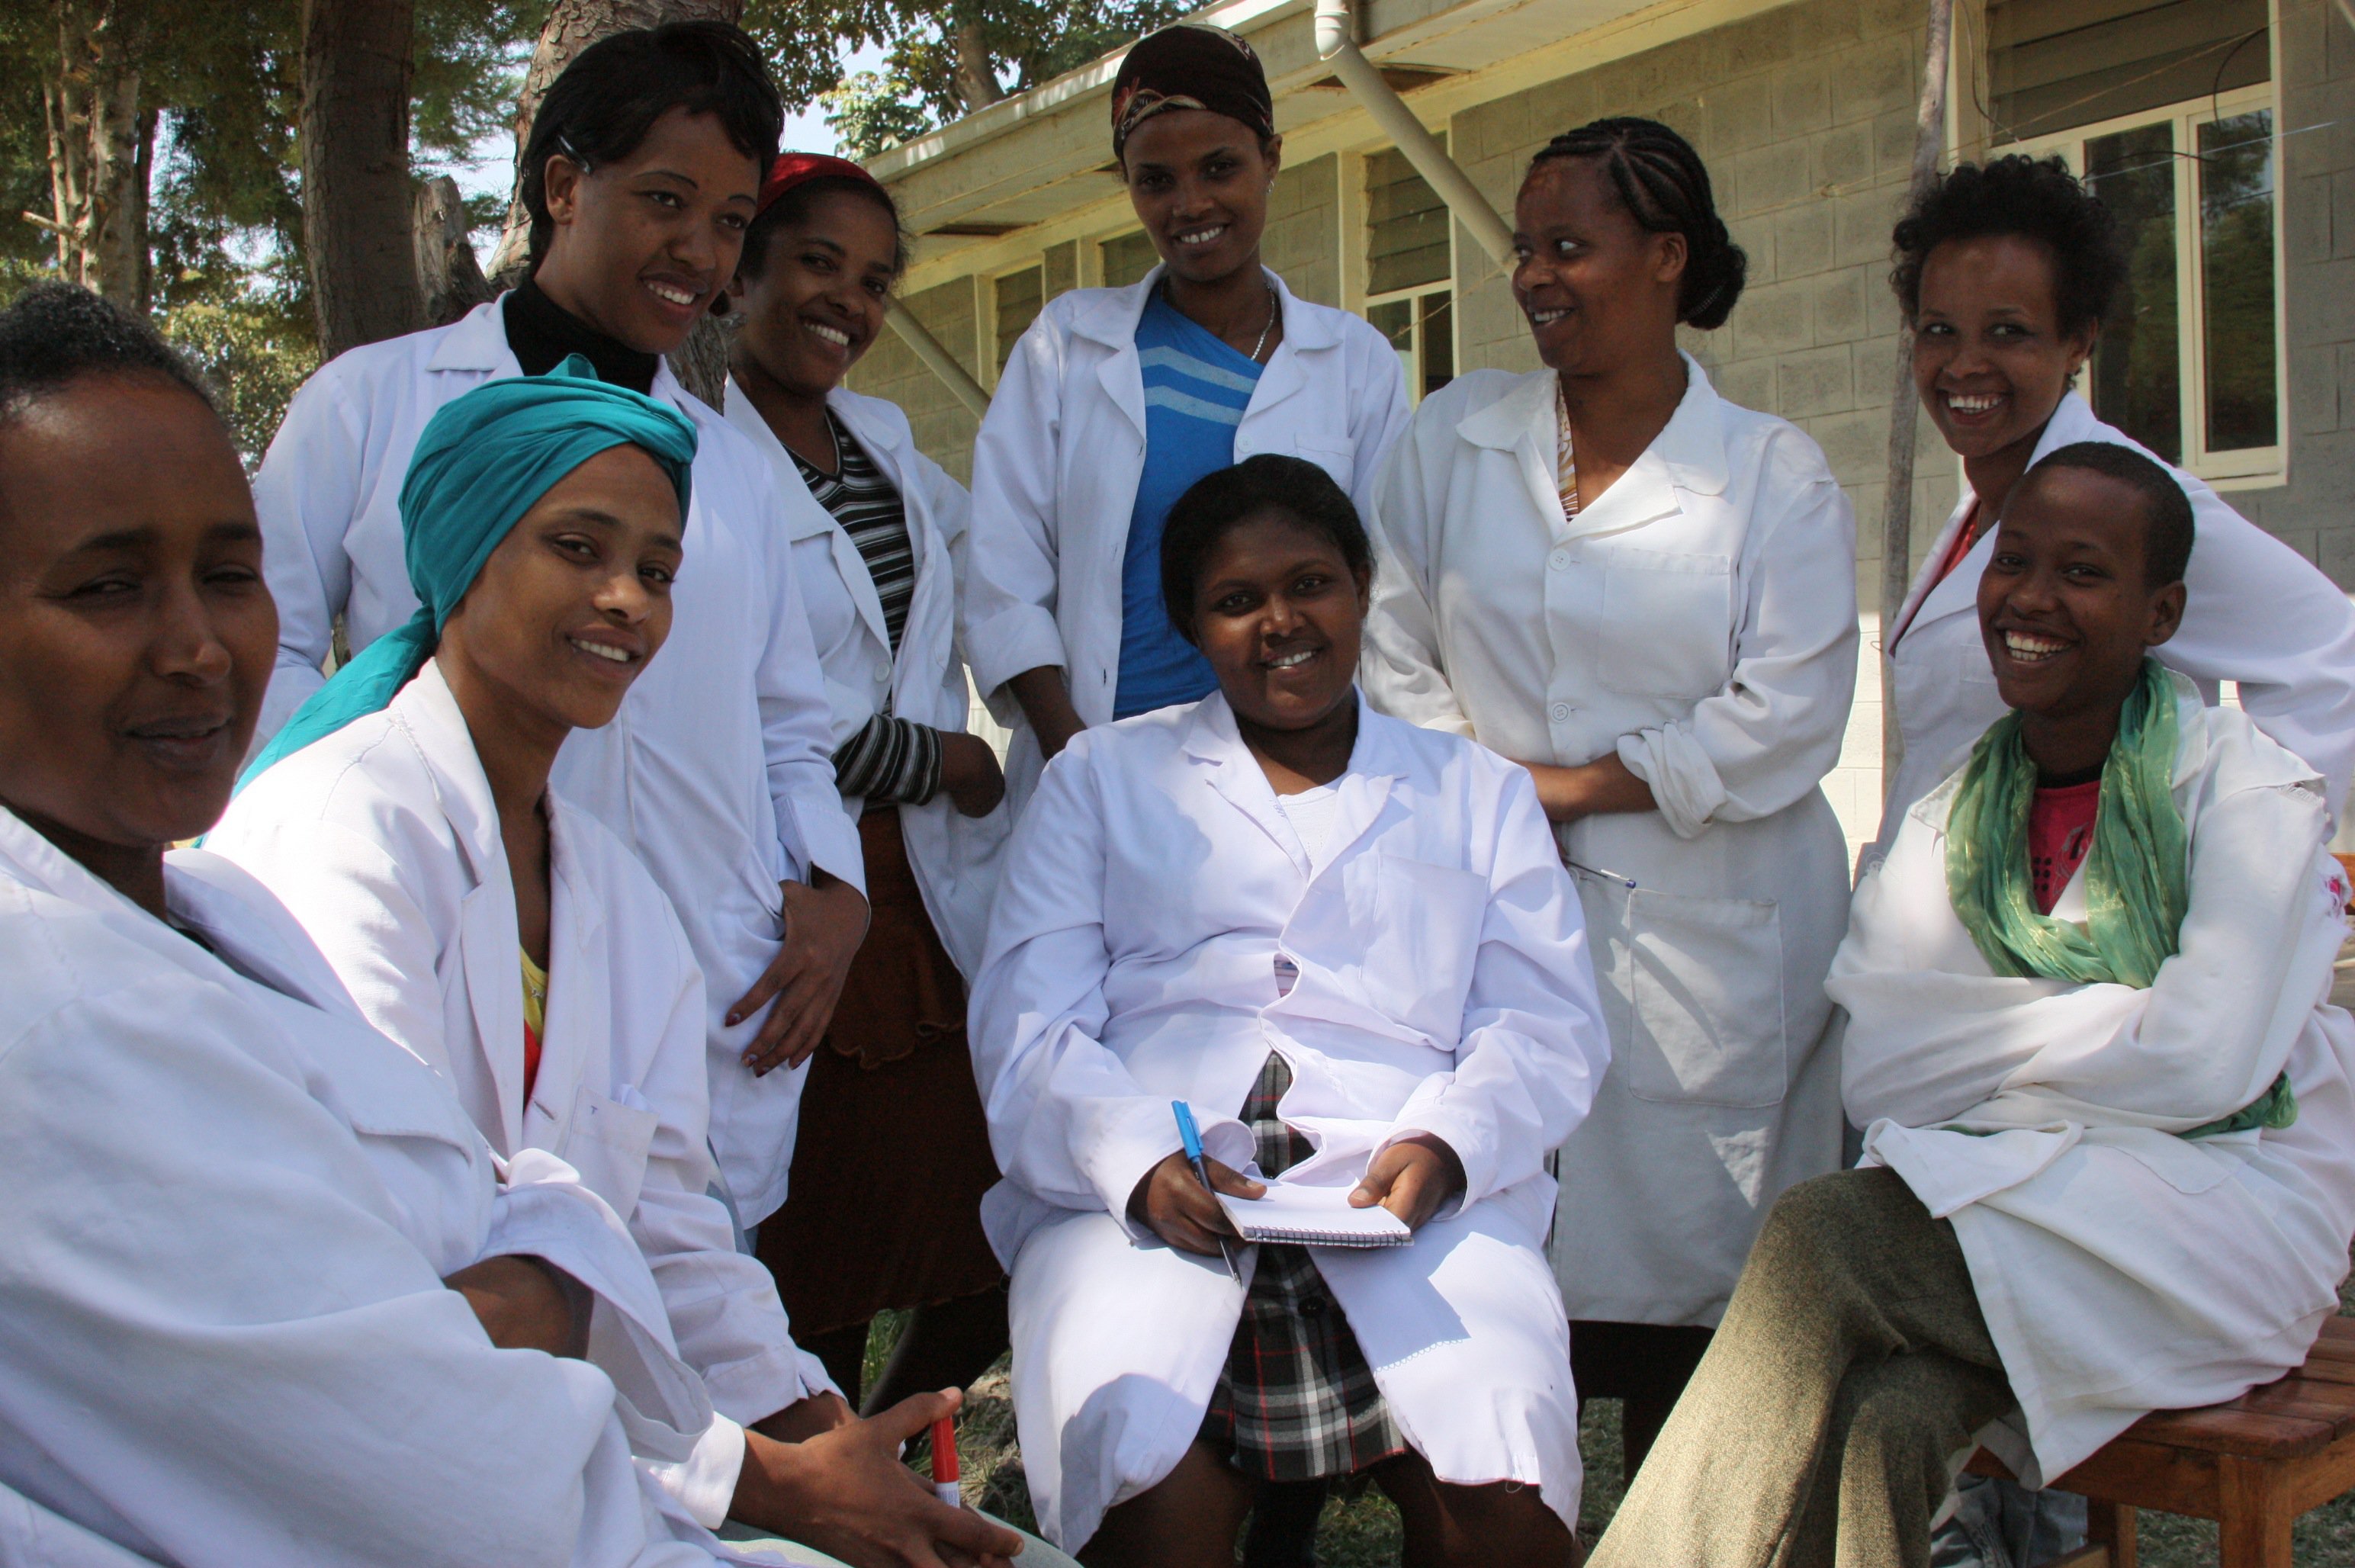 A group of doctors in Ethiopia